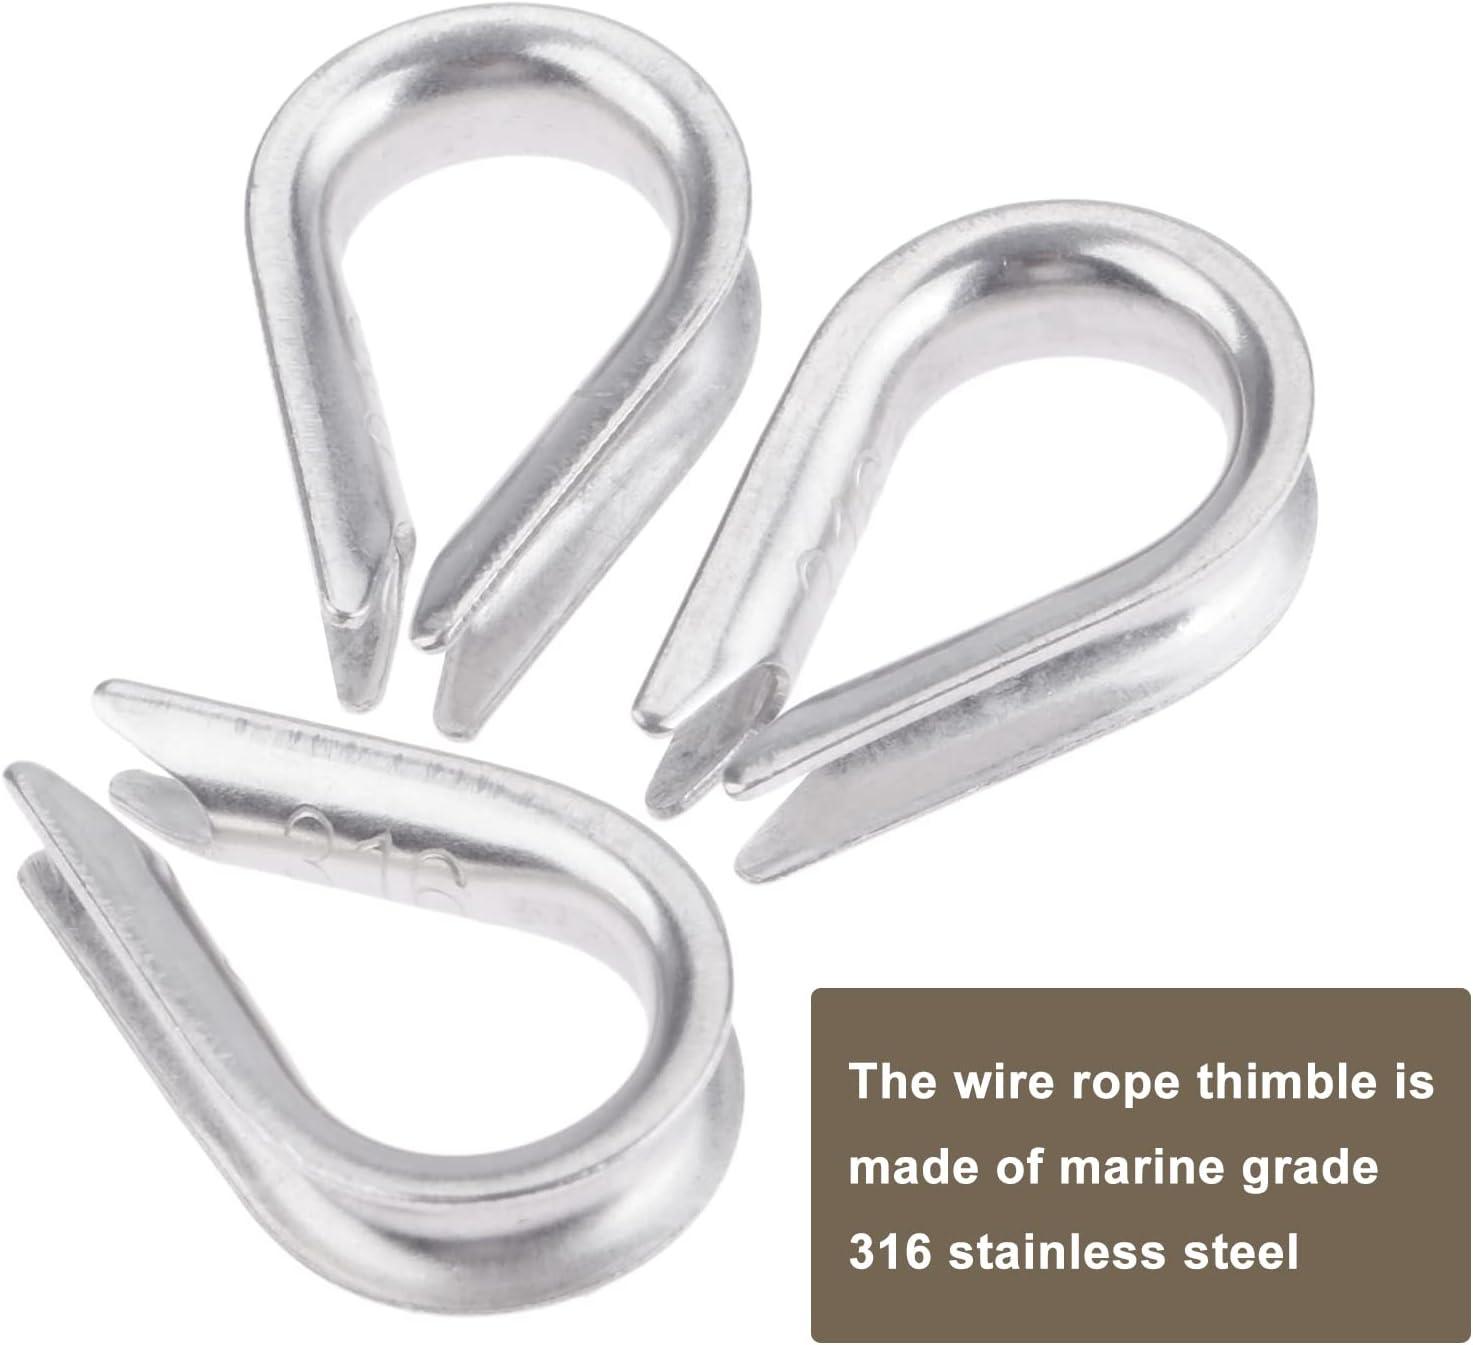 Wire Rope Thimbles